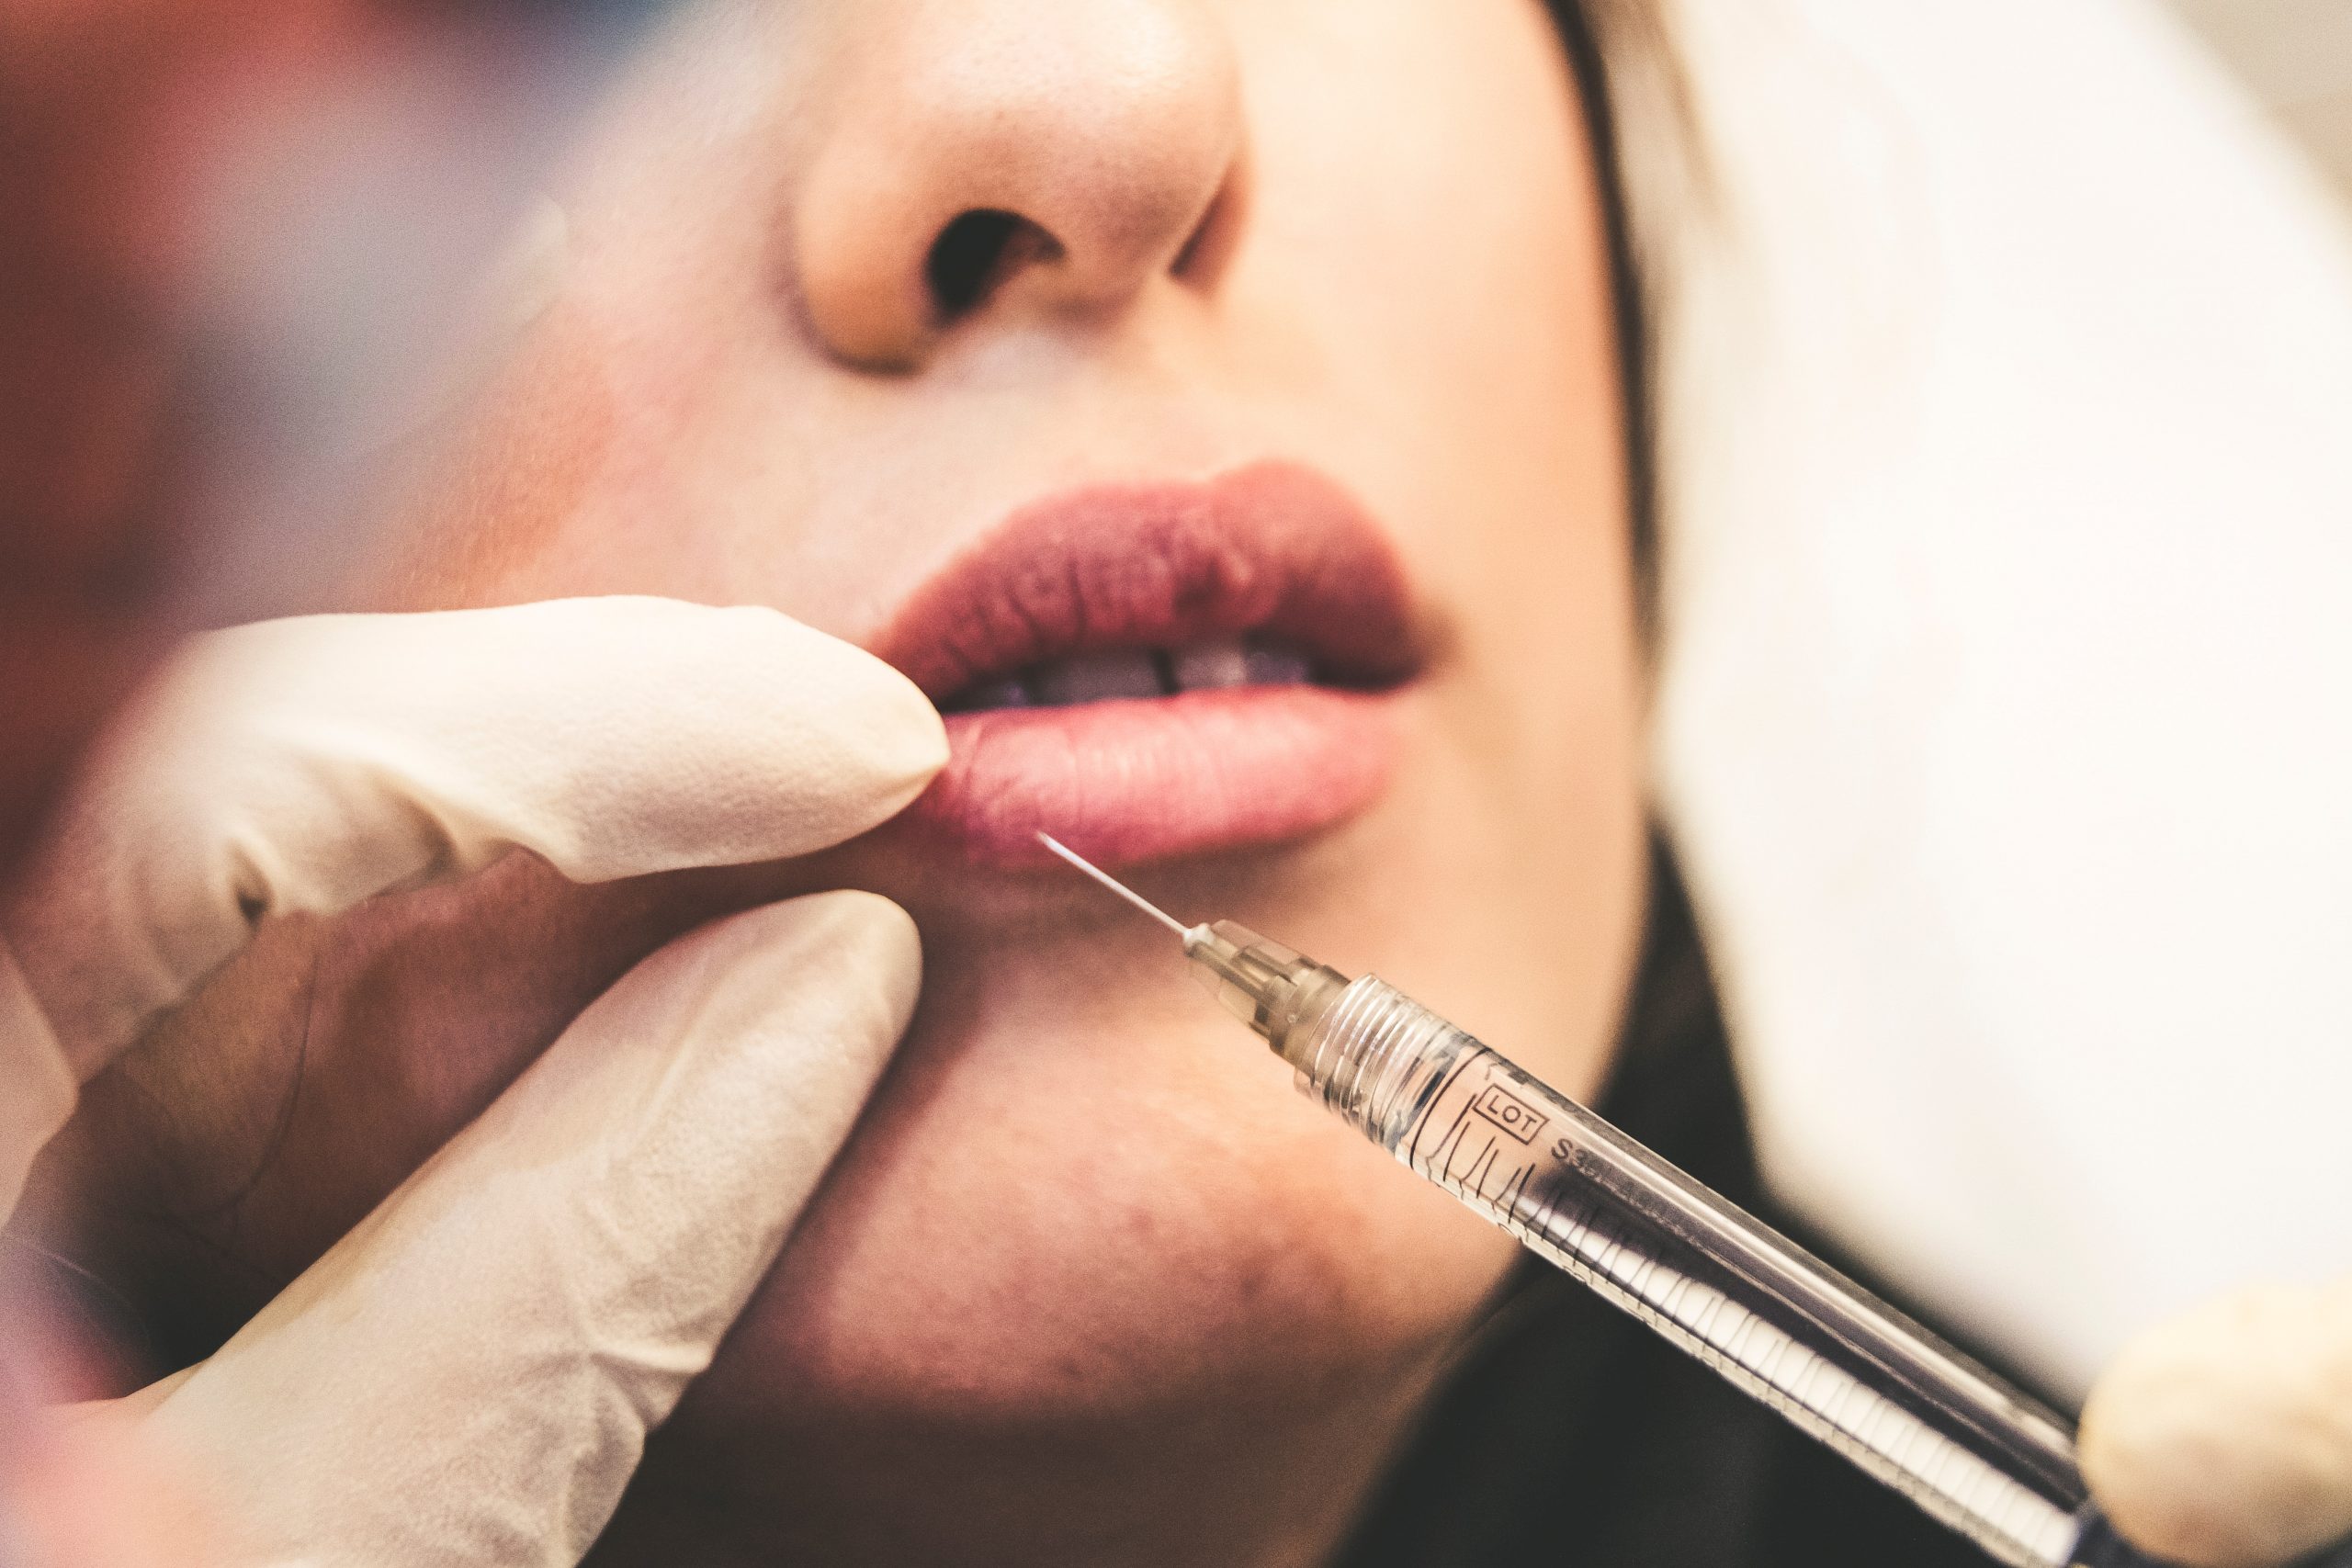 filler being injected into woman's lip